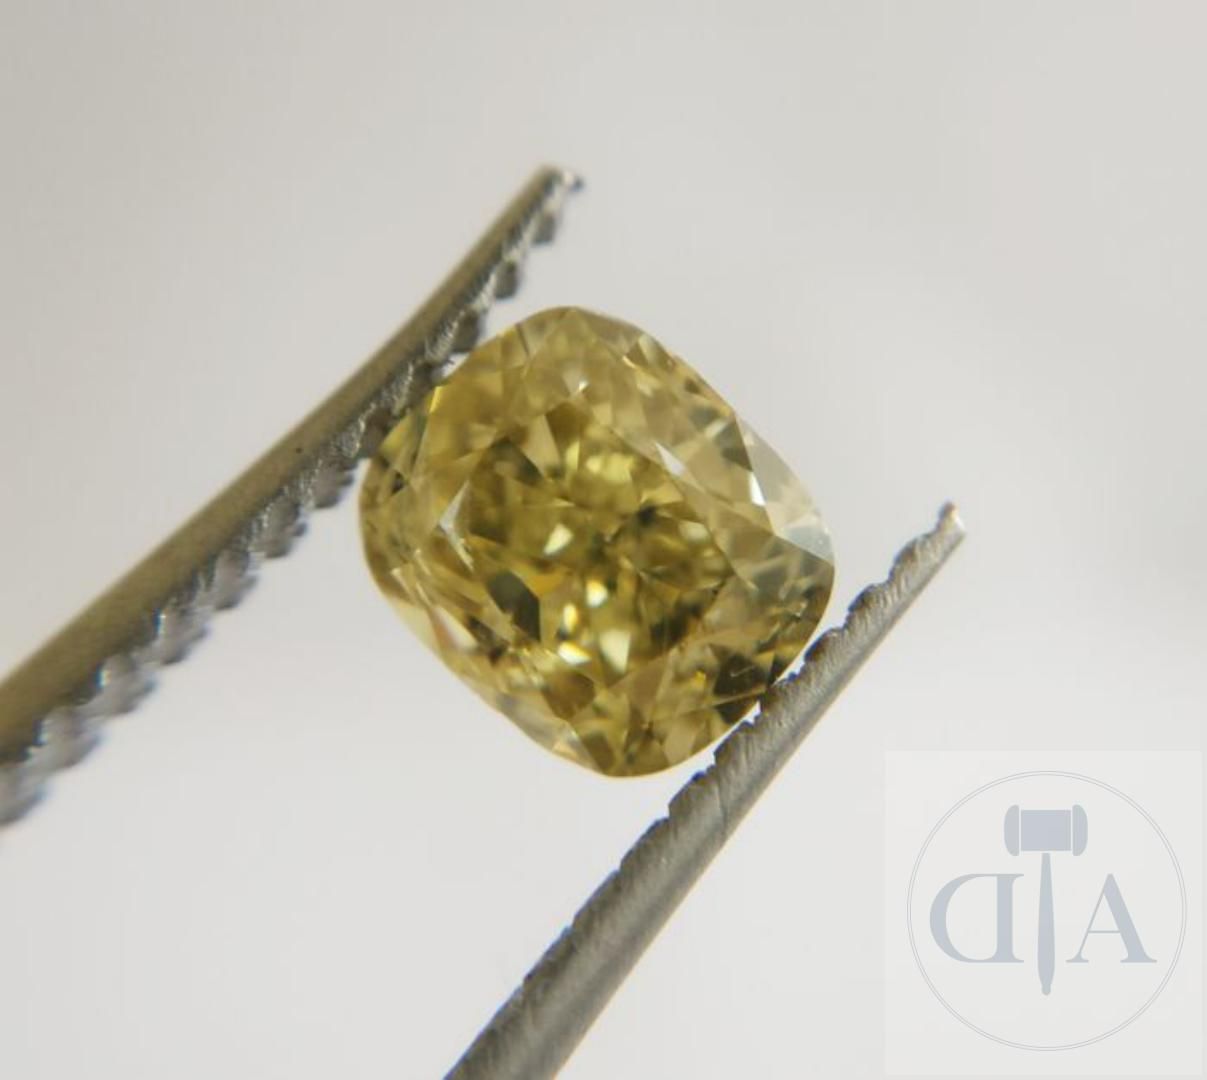 Null "Diamond 1.01ct GIA Certified- GIA Certificate No. 2175579852 
- Shape: Cus&hellip;